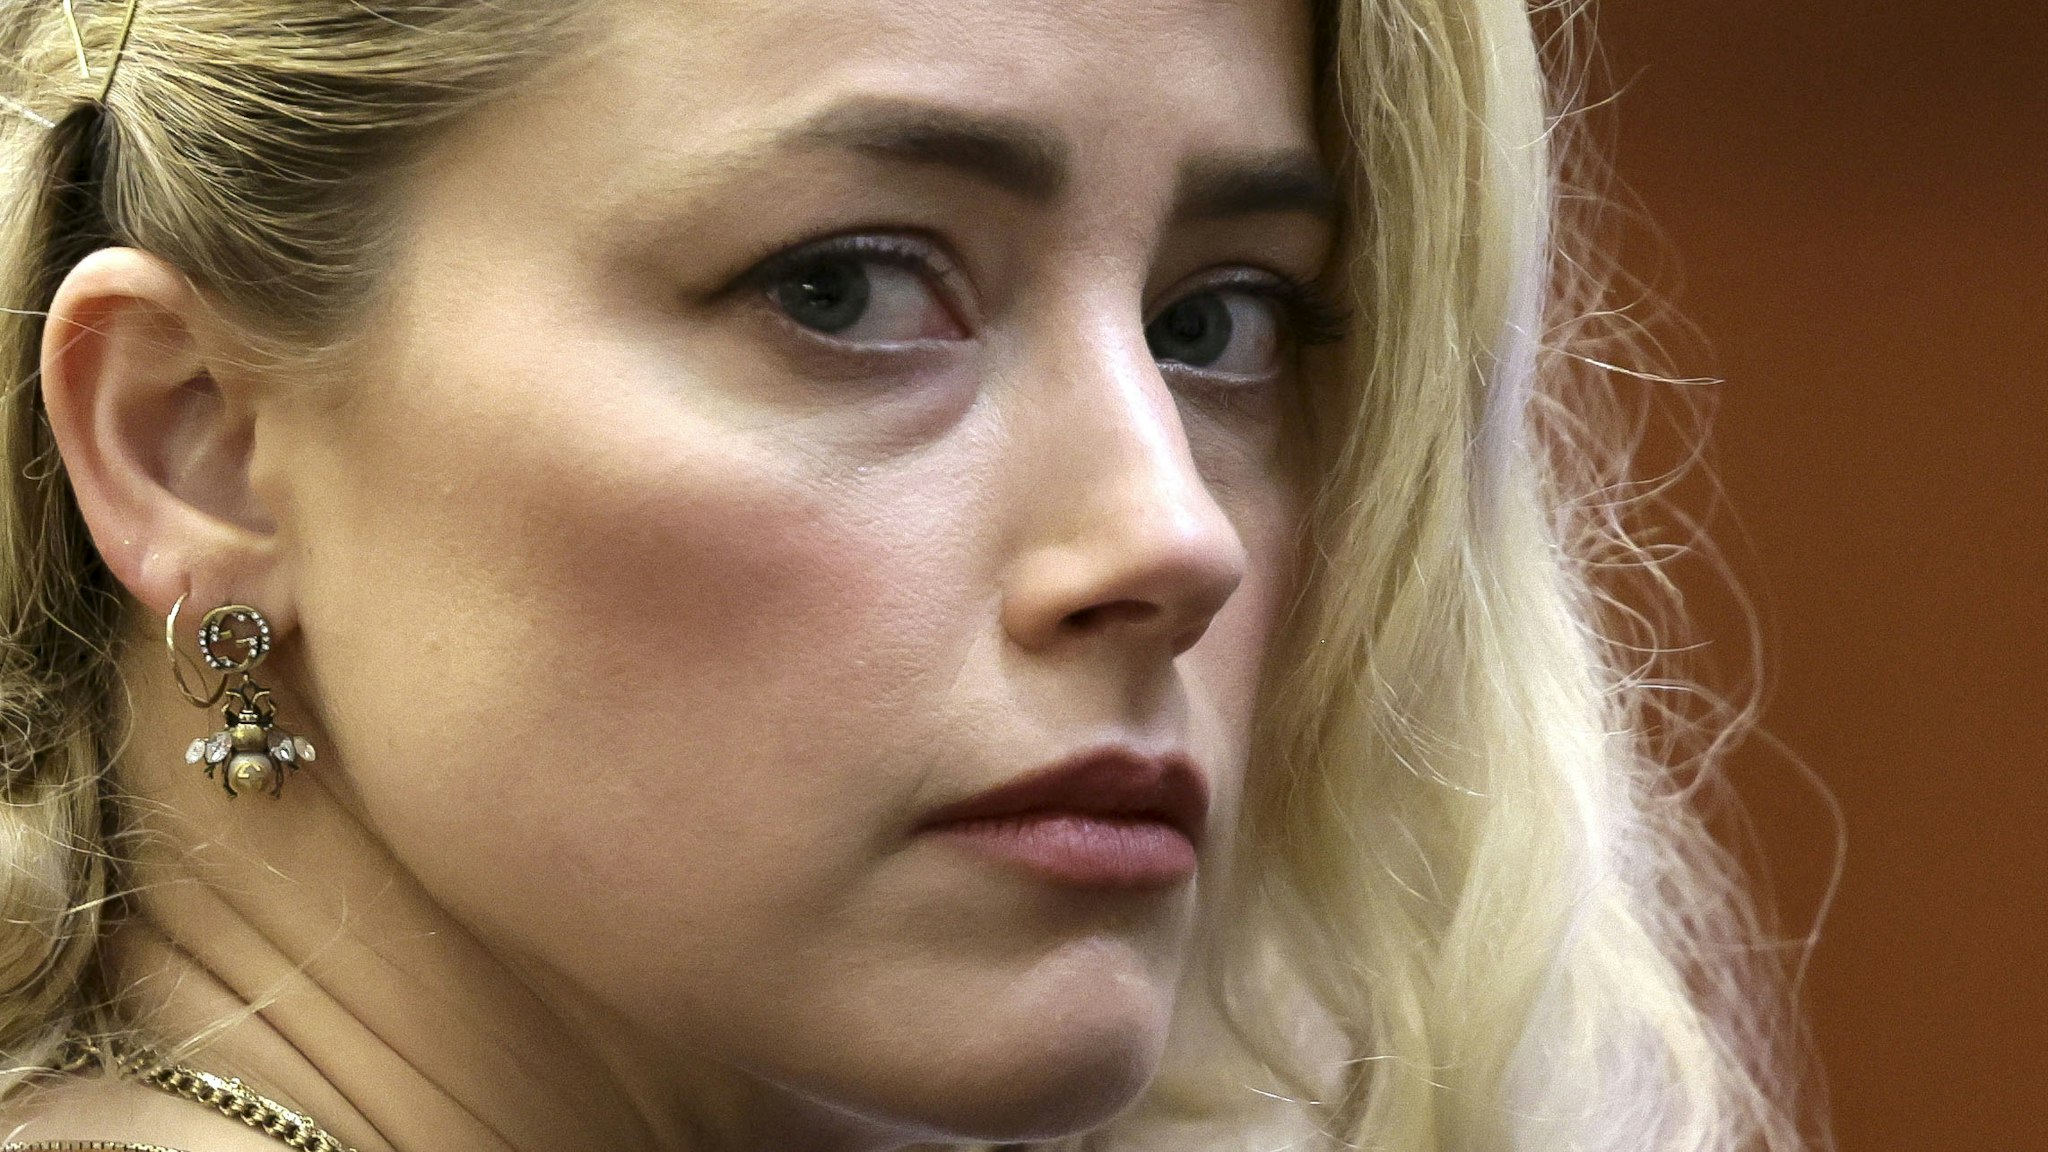 TOPSHOT - US actress Amber Heard waits before the jury announced a split verdict in favor of both Johnny Depp and Amber Heard on their claim and counter-claim in the Depp v. Heard civil defamation trial at the Fairfax County Circuit Courthouse in Fairfax, Virginia, on June 1, 2022. - A US jury on Wednesday found Johnny Depp and Amber Heard defamed each other, but sided far more strongly with the "Pirates of the Caribbean" star following an intense libel trial involving bitterly contested allegations of sexual violence and domestic abuse.